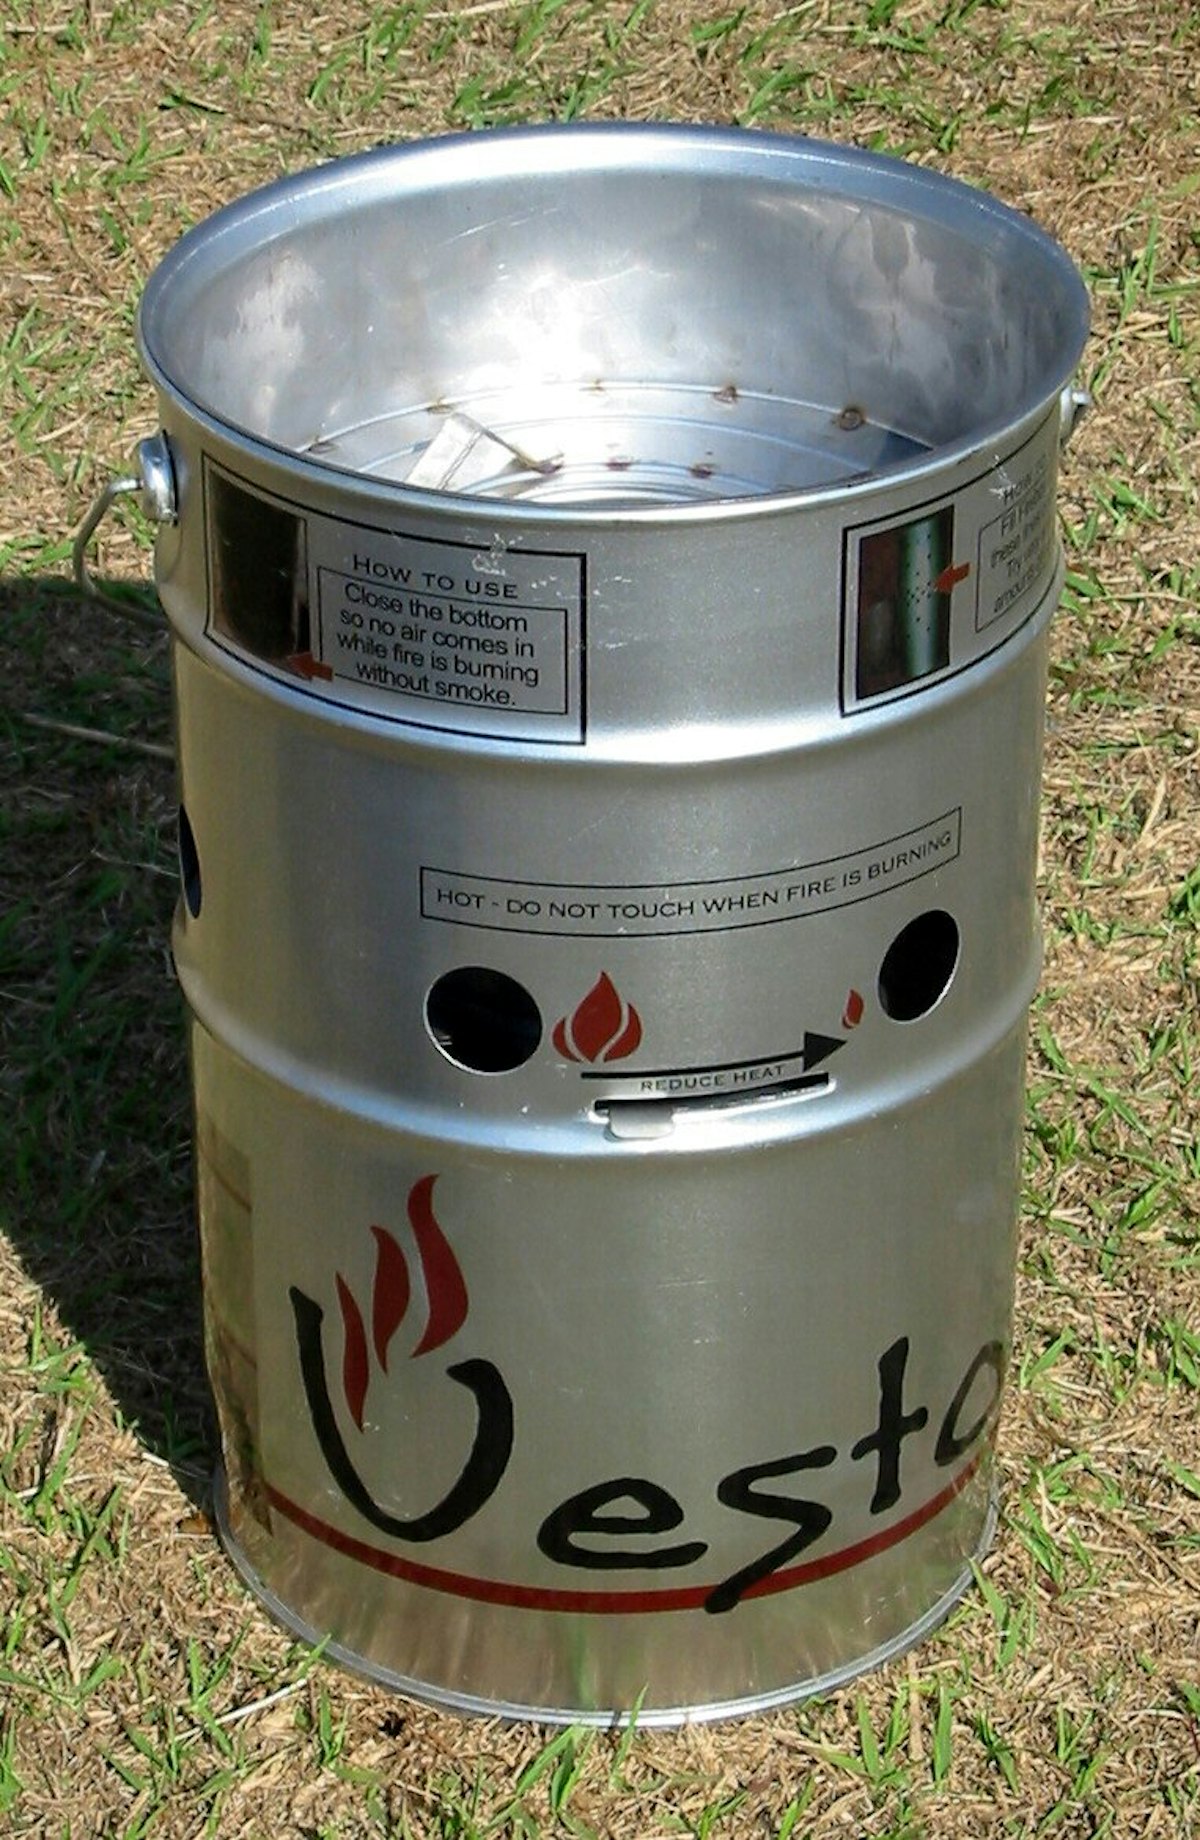 Designed around a modified 25-liter paint can, the Vesto stove sells for about US$29 and is about four times more efficient than an open fire.